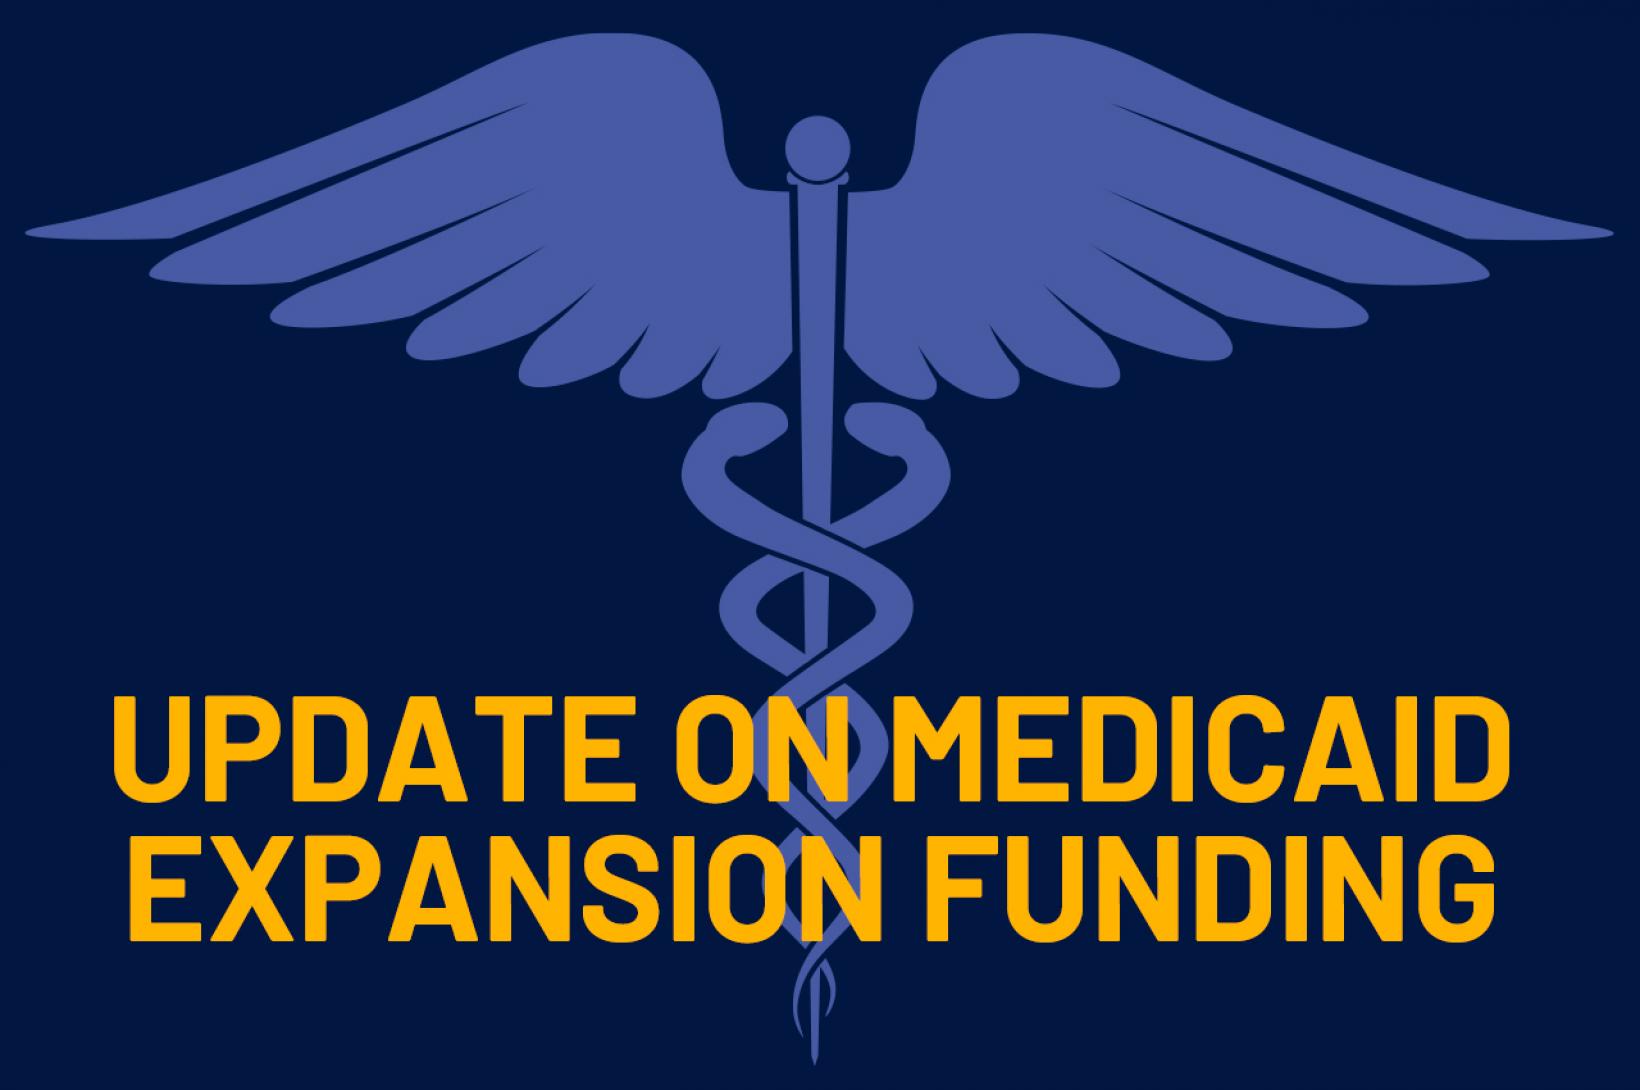 Update on Medicaid Expansion Funding